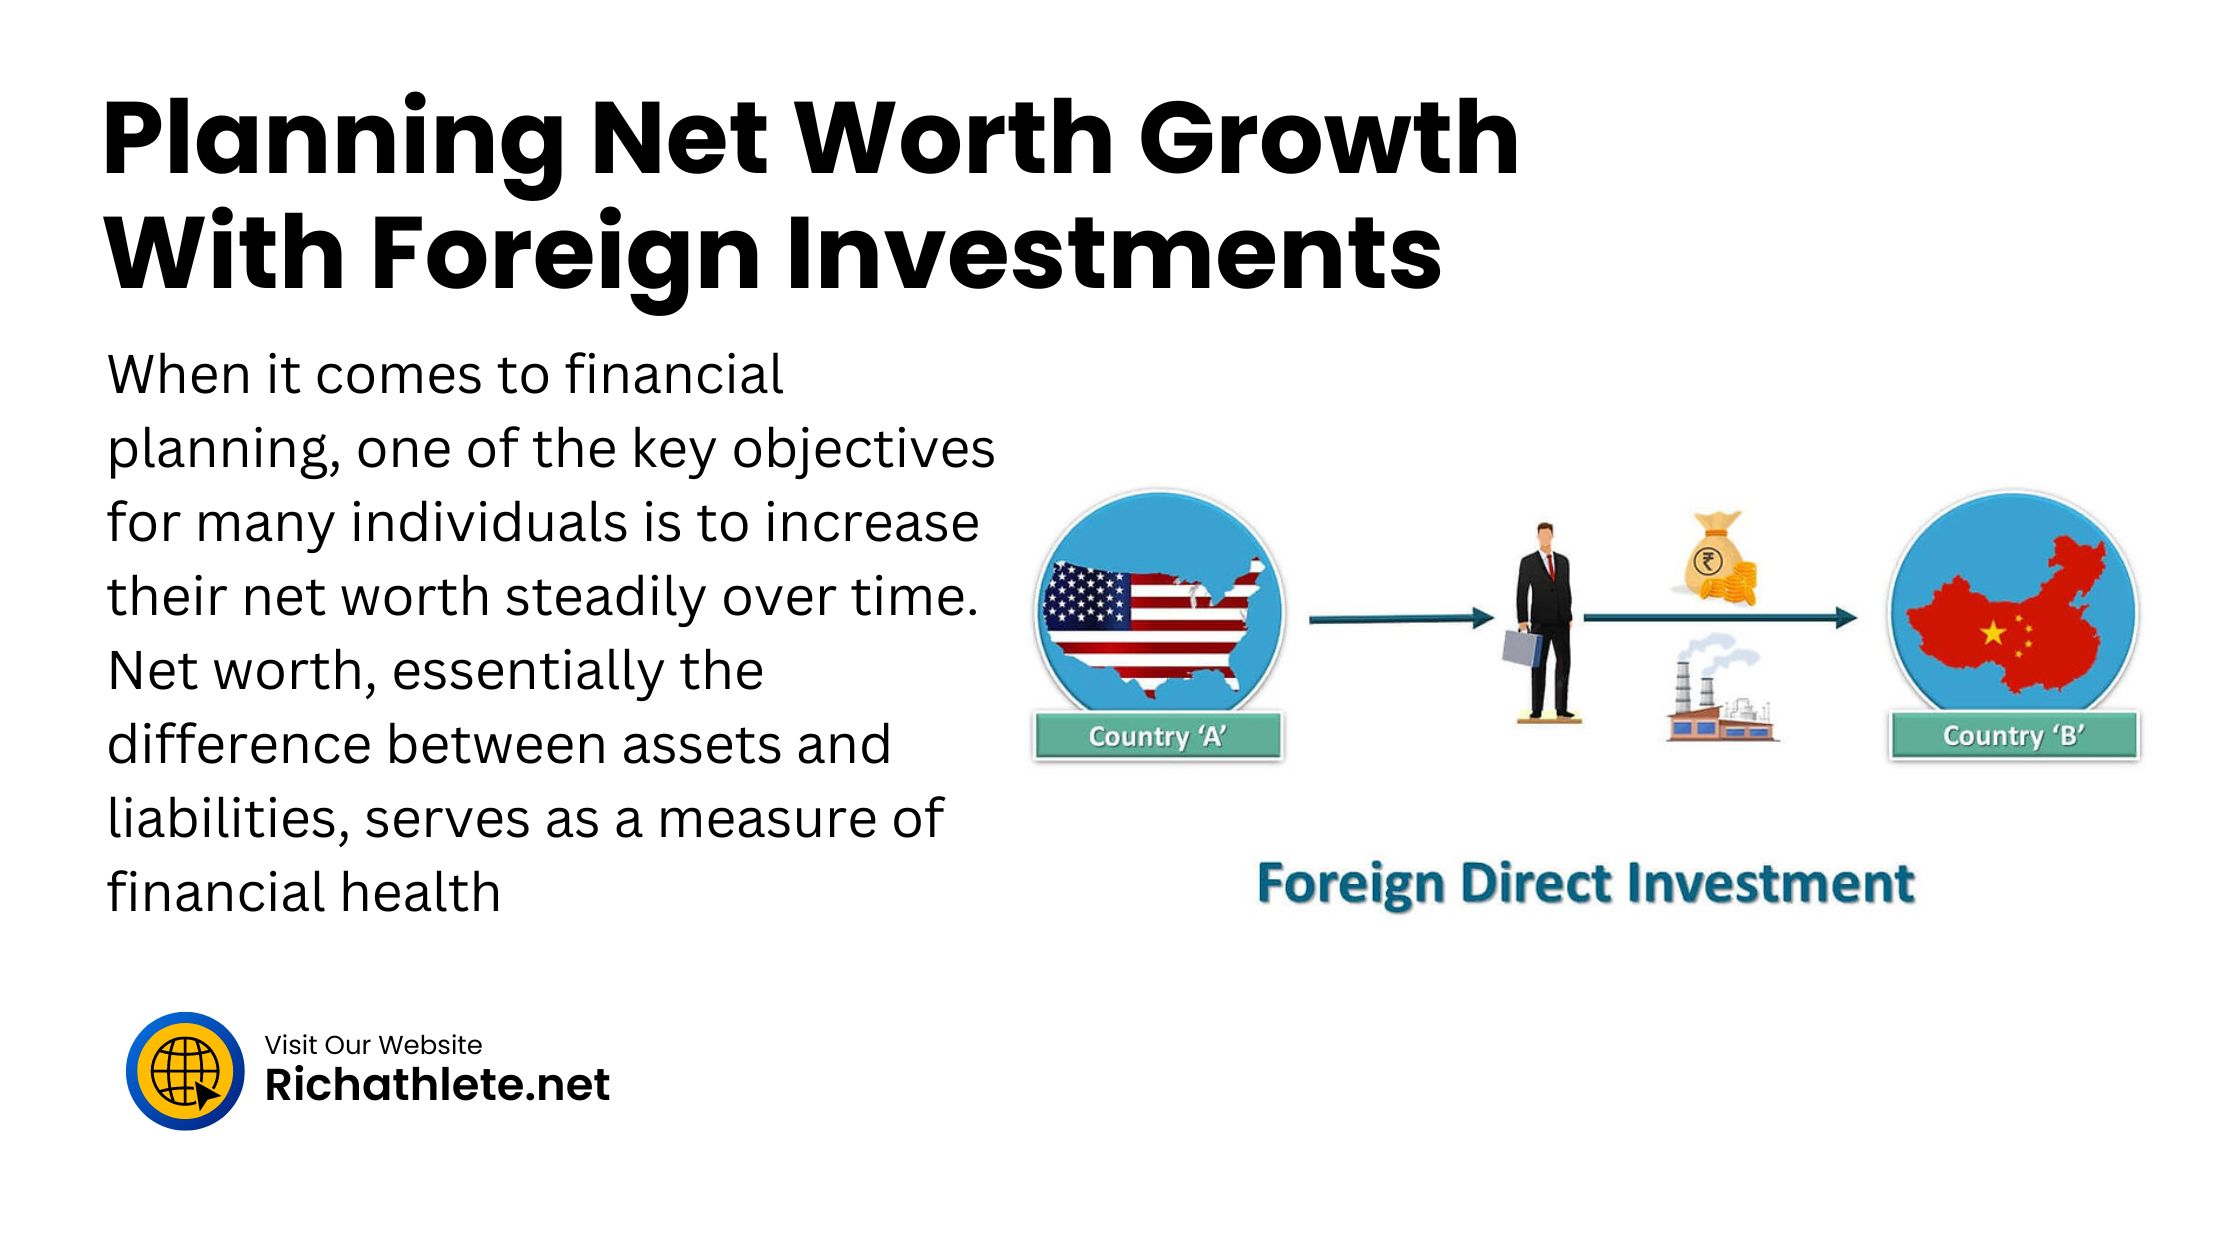 Planning Net Worth Growth With Foreign Investments